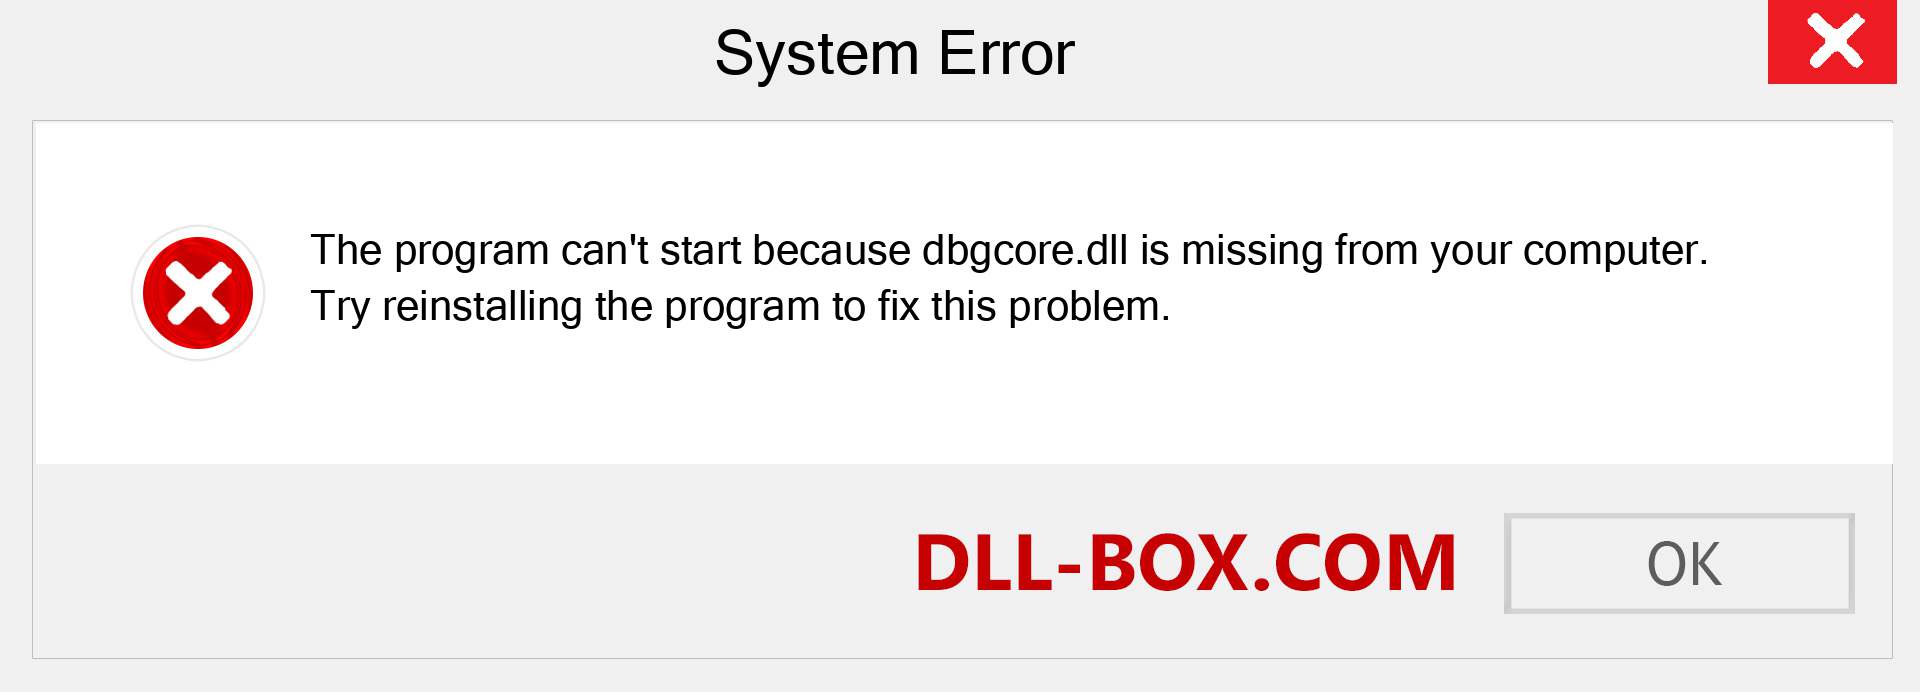  dbgcore.dll file is missing?. Download for Windows 7, 8, 10 - Fix  dbgcore dll Missing Error on Windows, photos, images